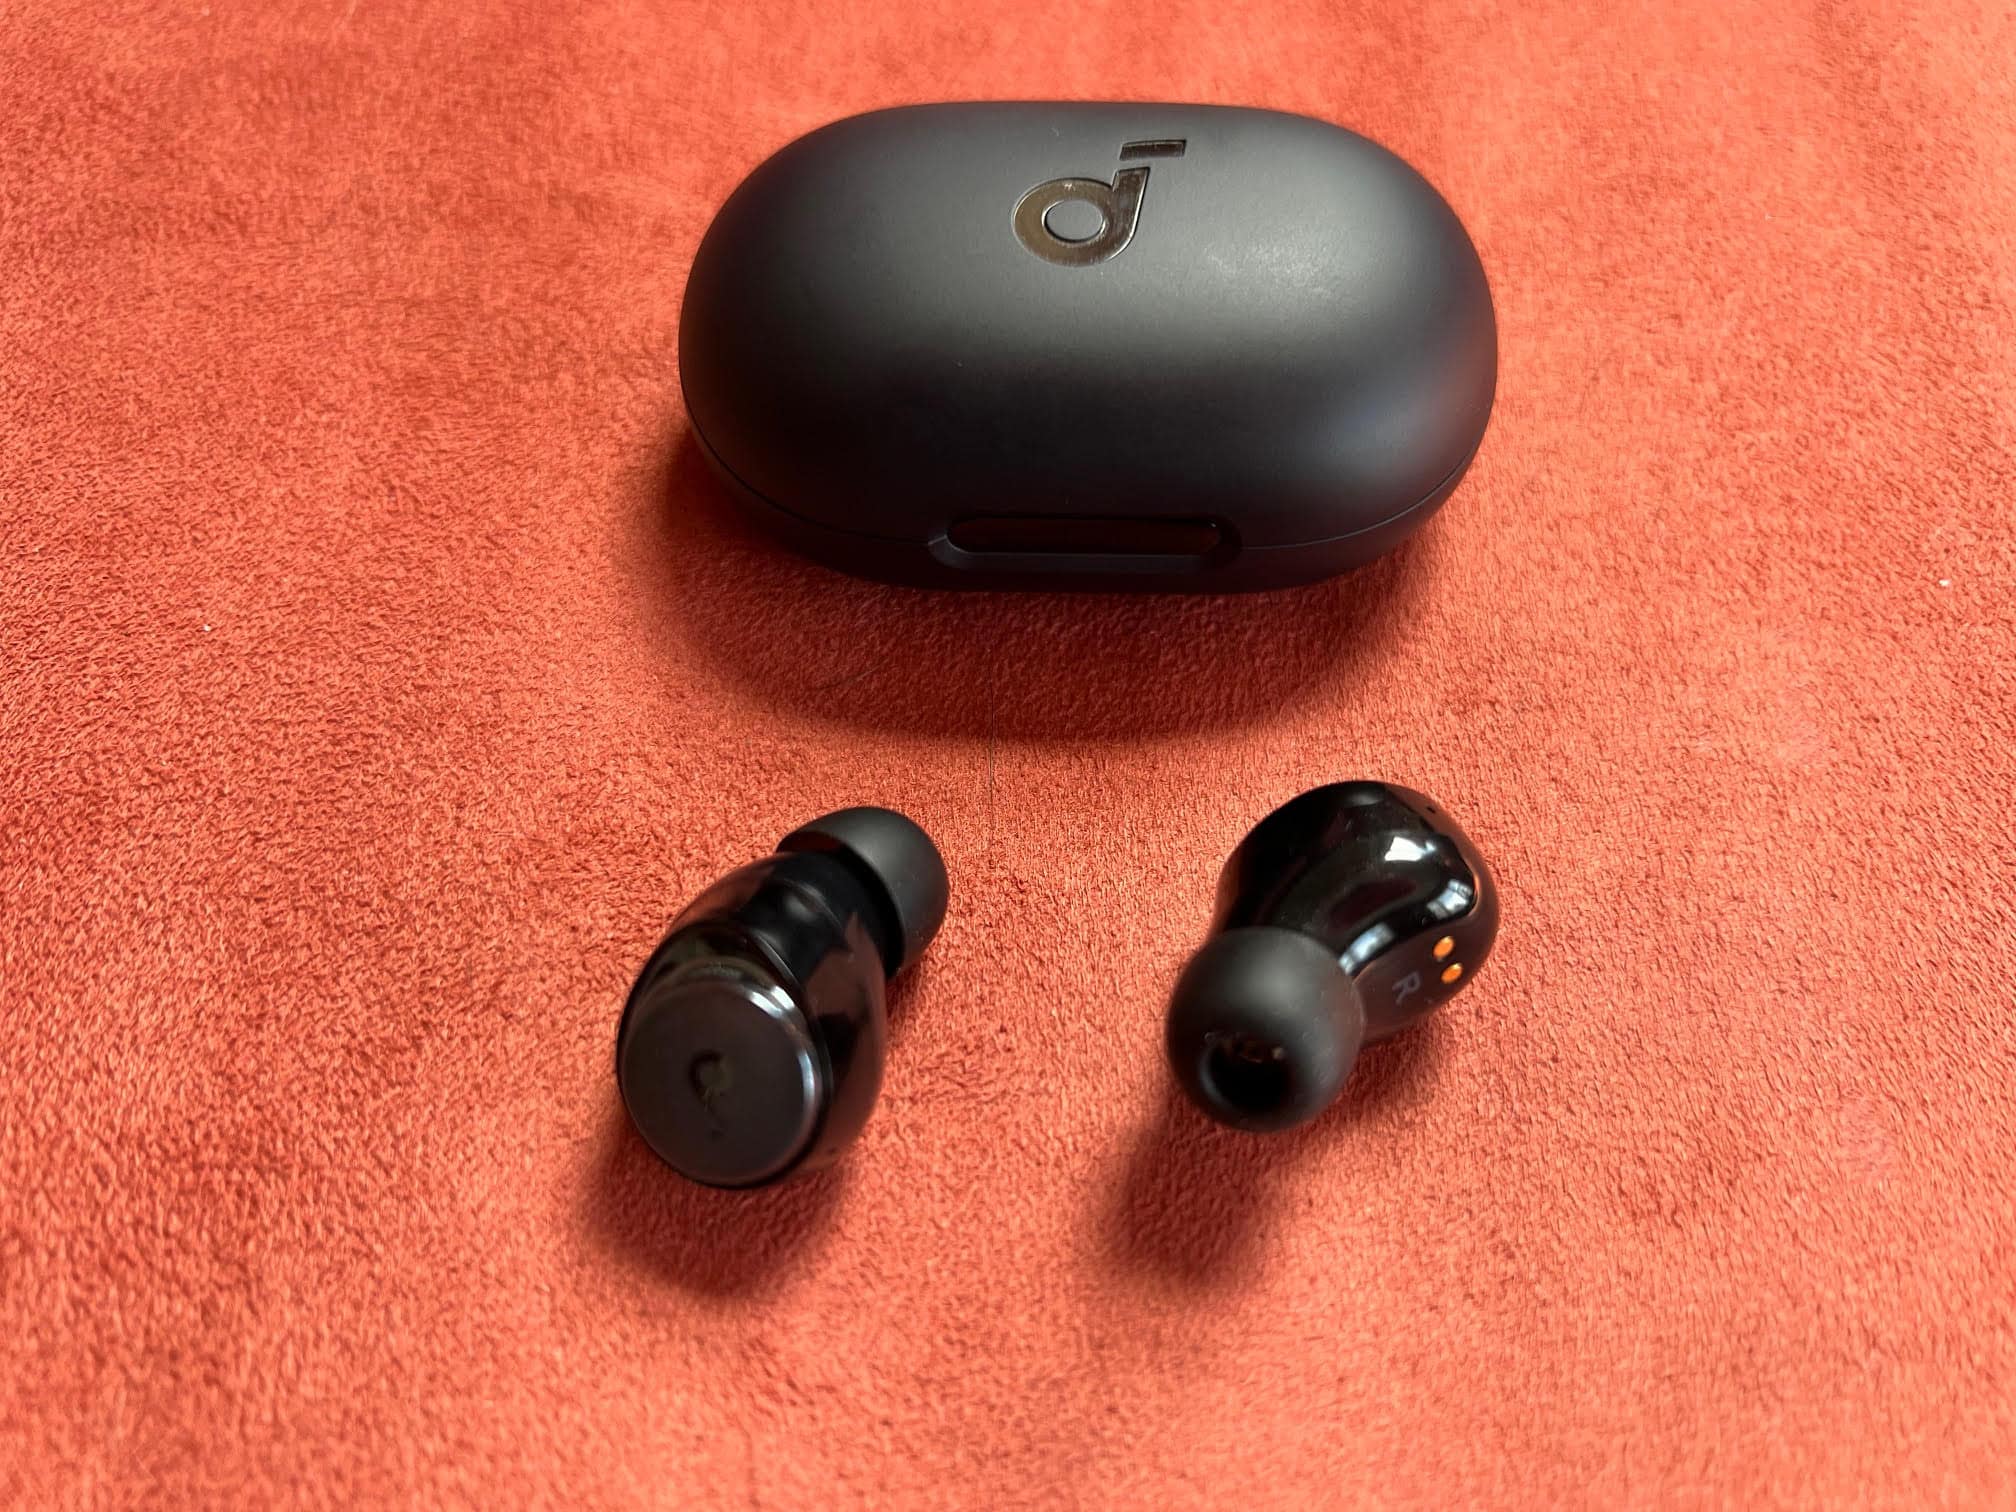 The new Soundcore Space A40 earbuds have stellar ANC and epic battery life. And you'll probably like how they sound, too.